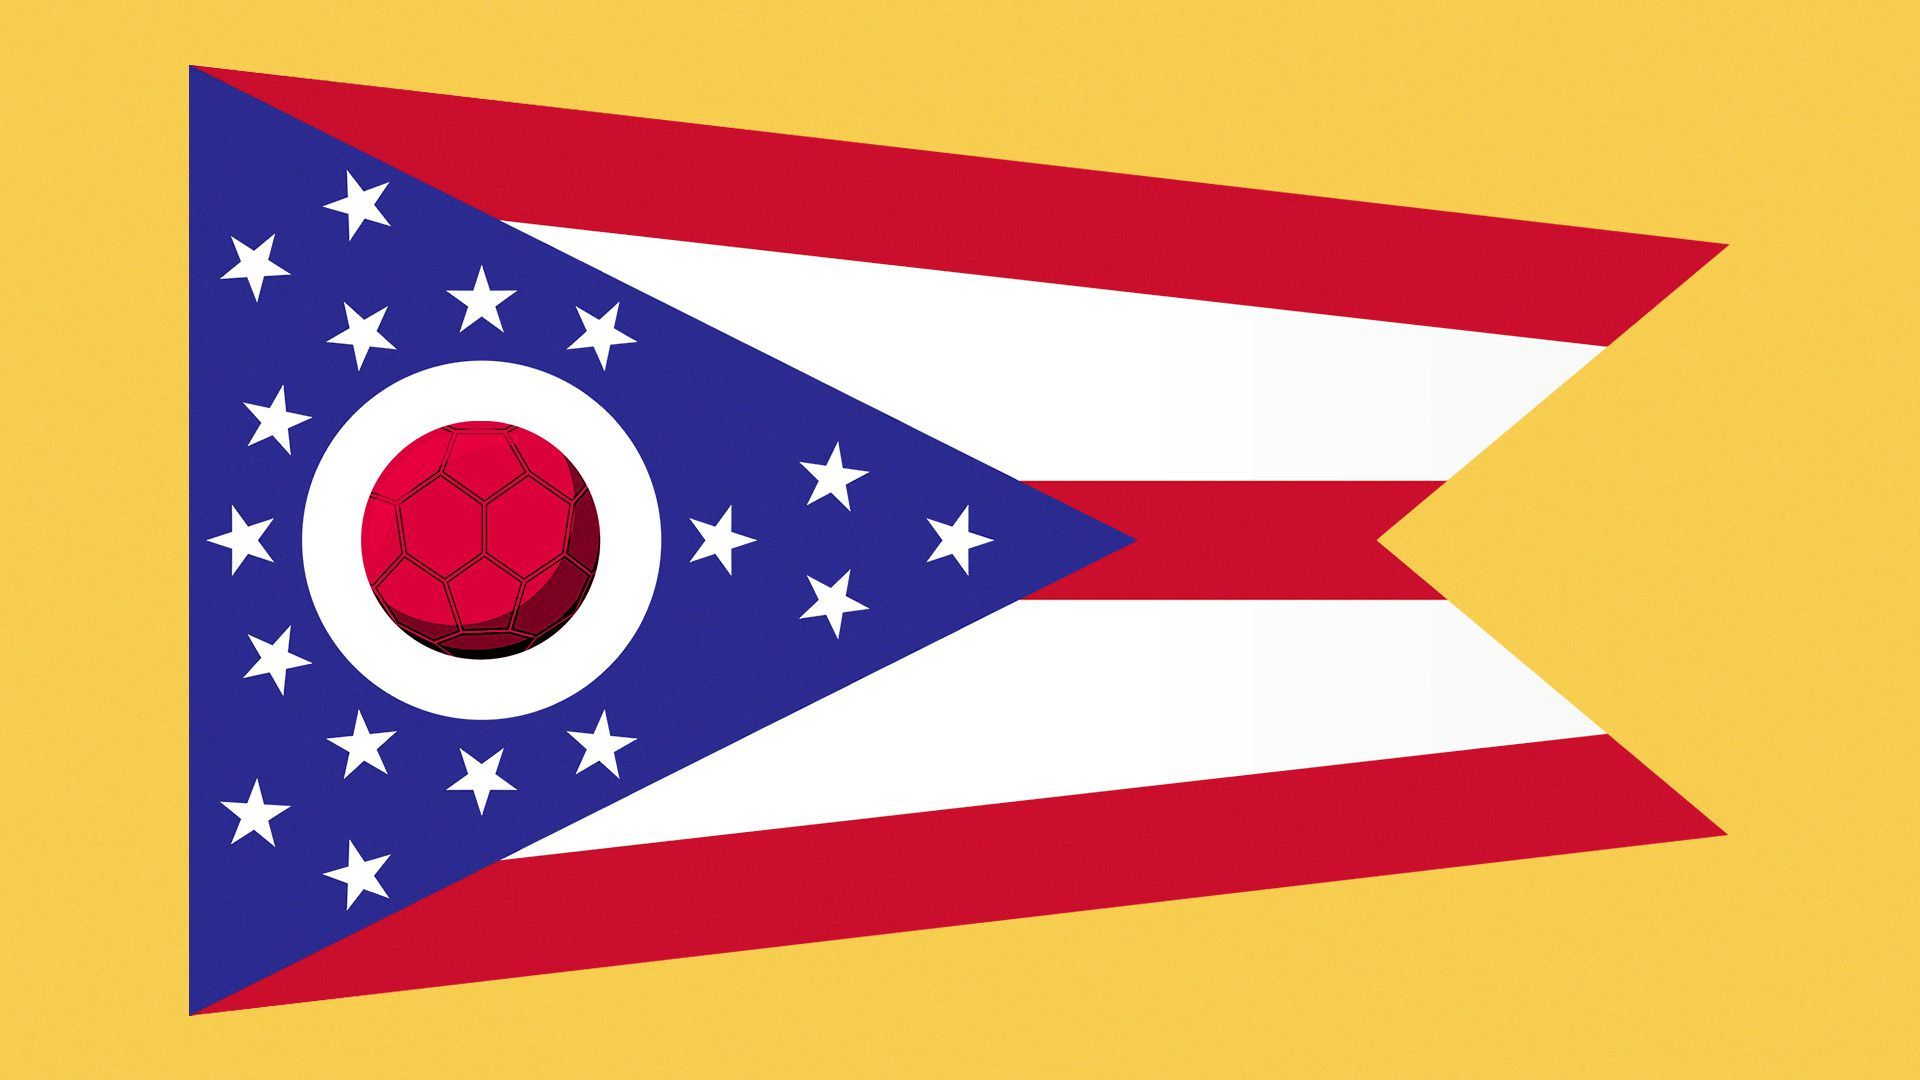 Illustration of the Ohio flag with a hand ball in the circle.